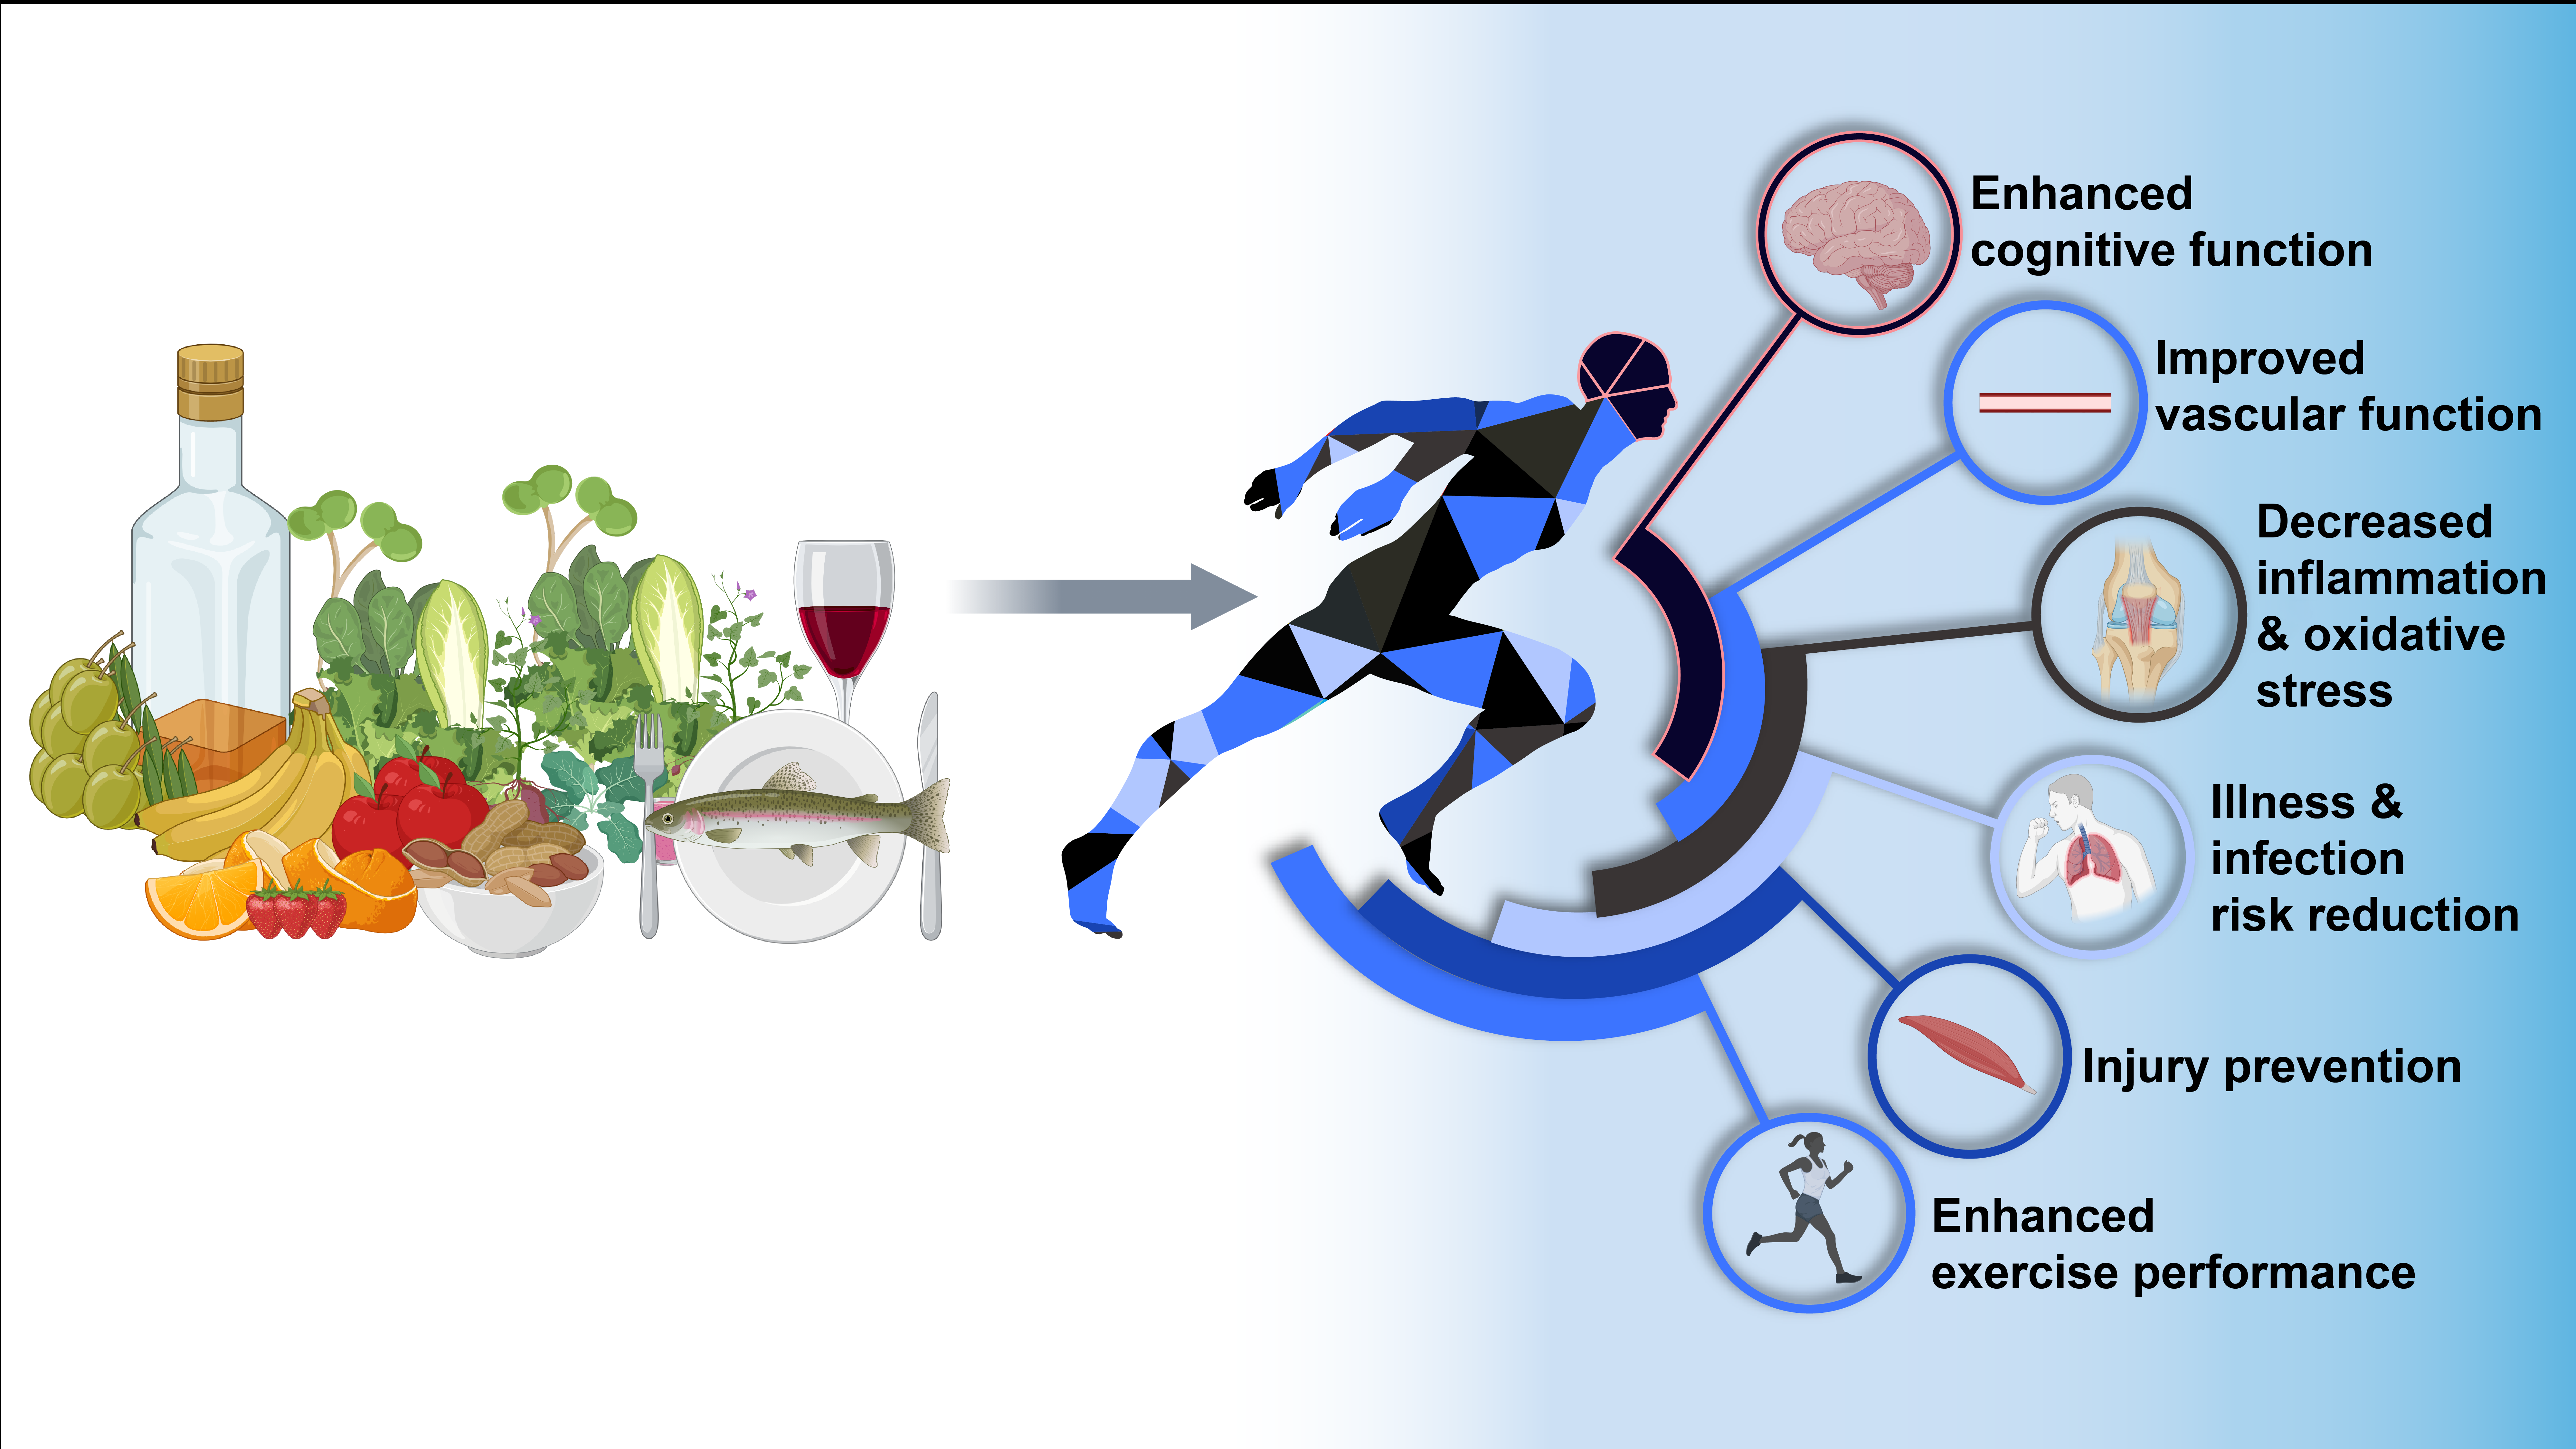 The Mediterranean dietary pattern for optimising health and performance in competitive athletes a narrative review British Journal of Nutrition Cambridge Core image